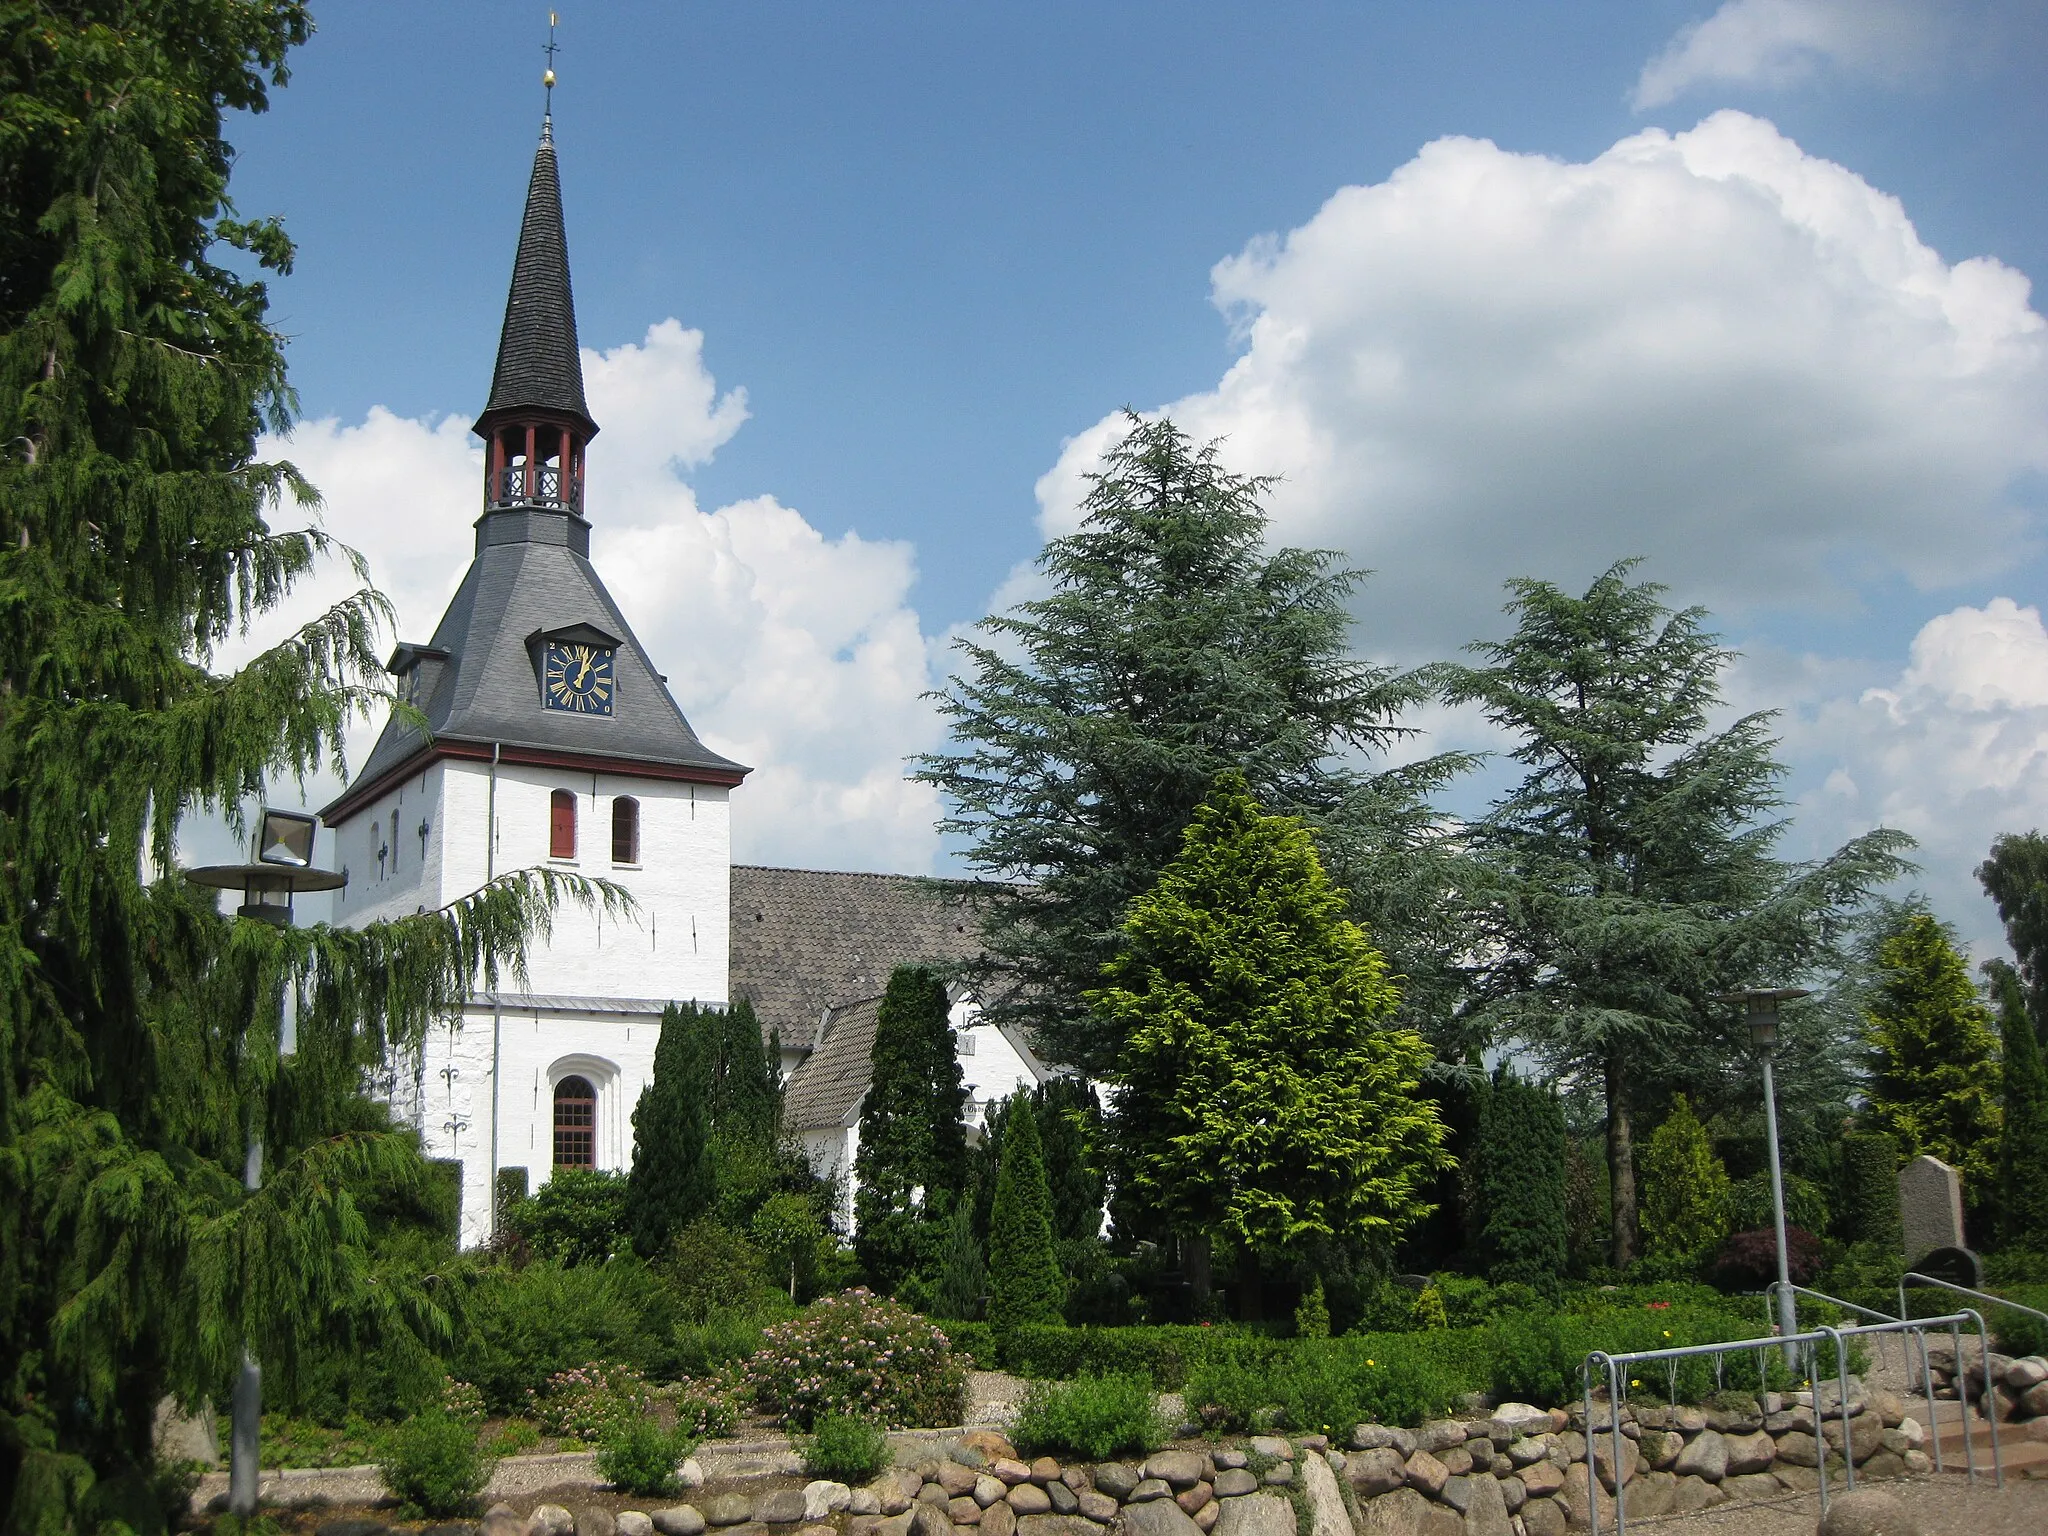 Photo showing: The church "Tinglev Kirke" in the small town "Tinglev". The town is located in Southern Jutland (in south Denmark).